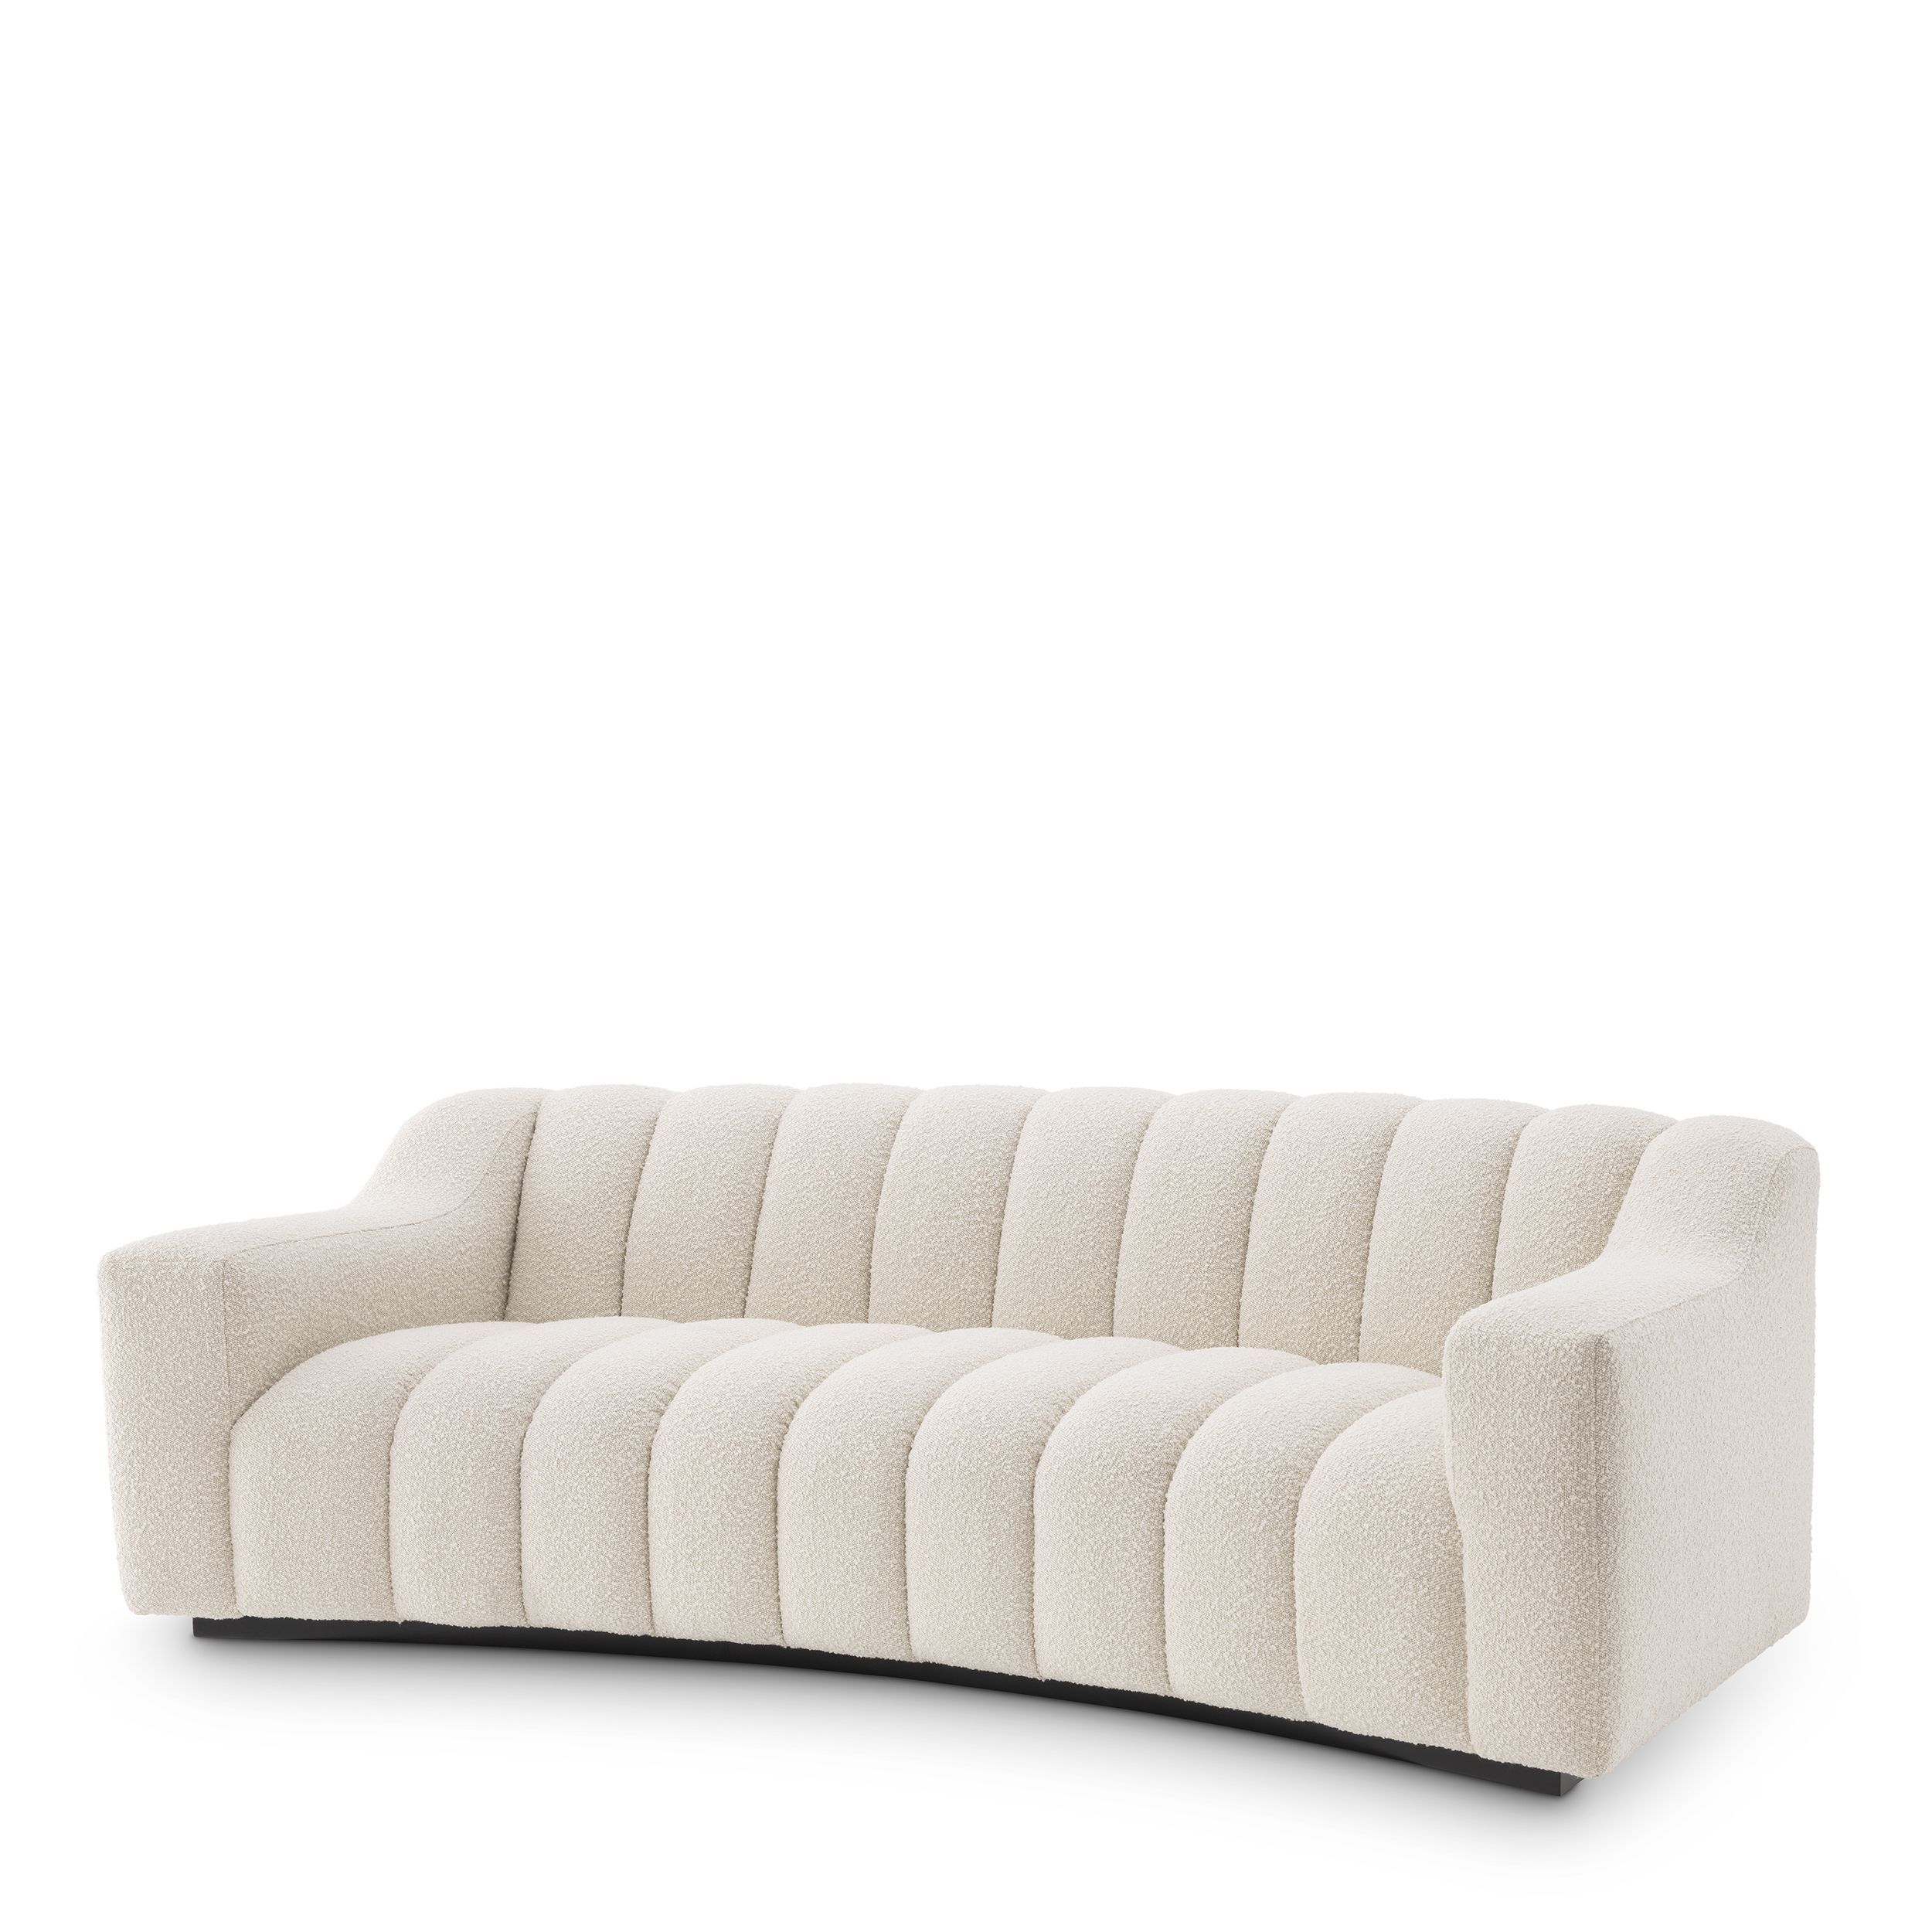 Kelly Sofa S Boucle Cream Eichholtz – Fmdesign Elements Within Sofas In Cream (View 6 of 15)